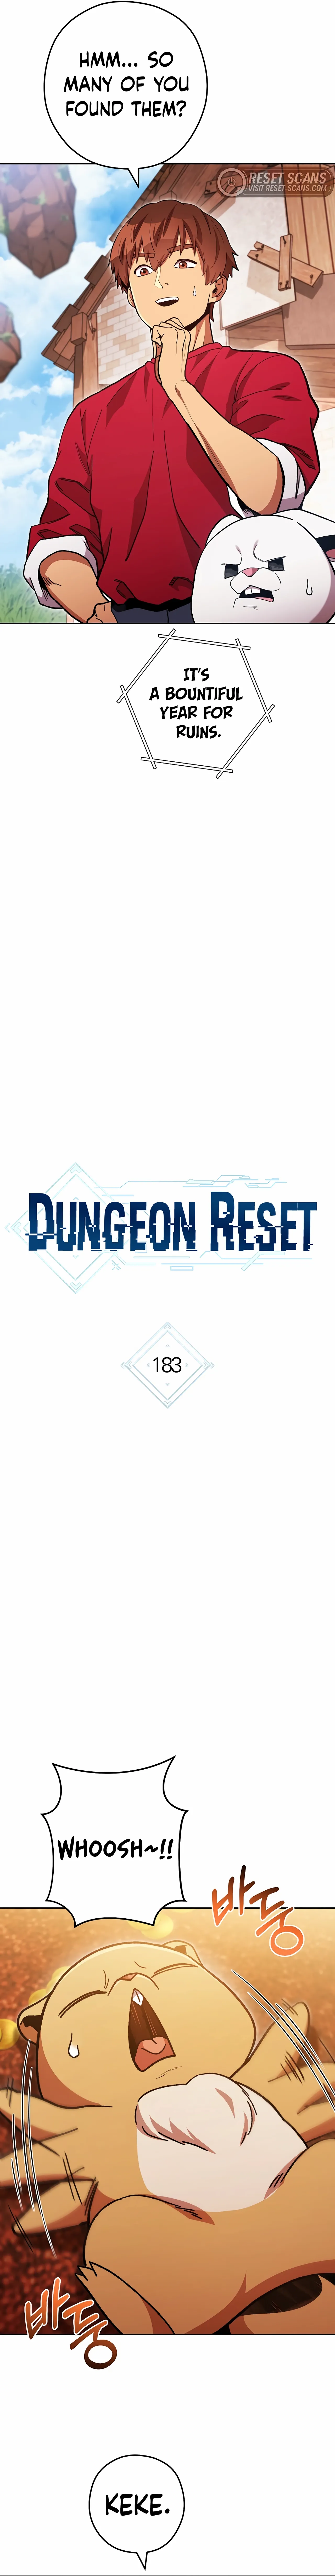 Dungeon Reset - Page 2